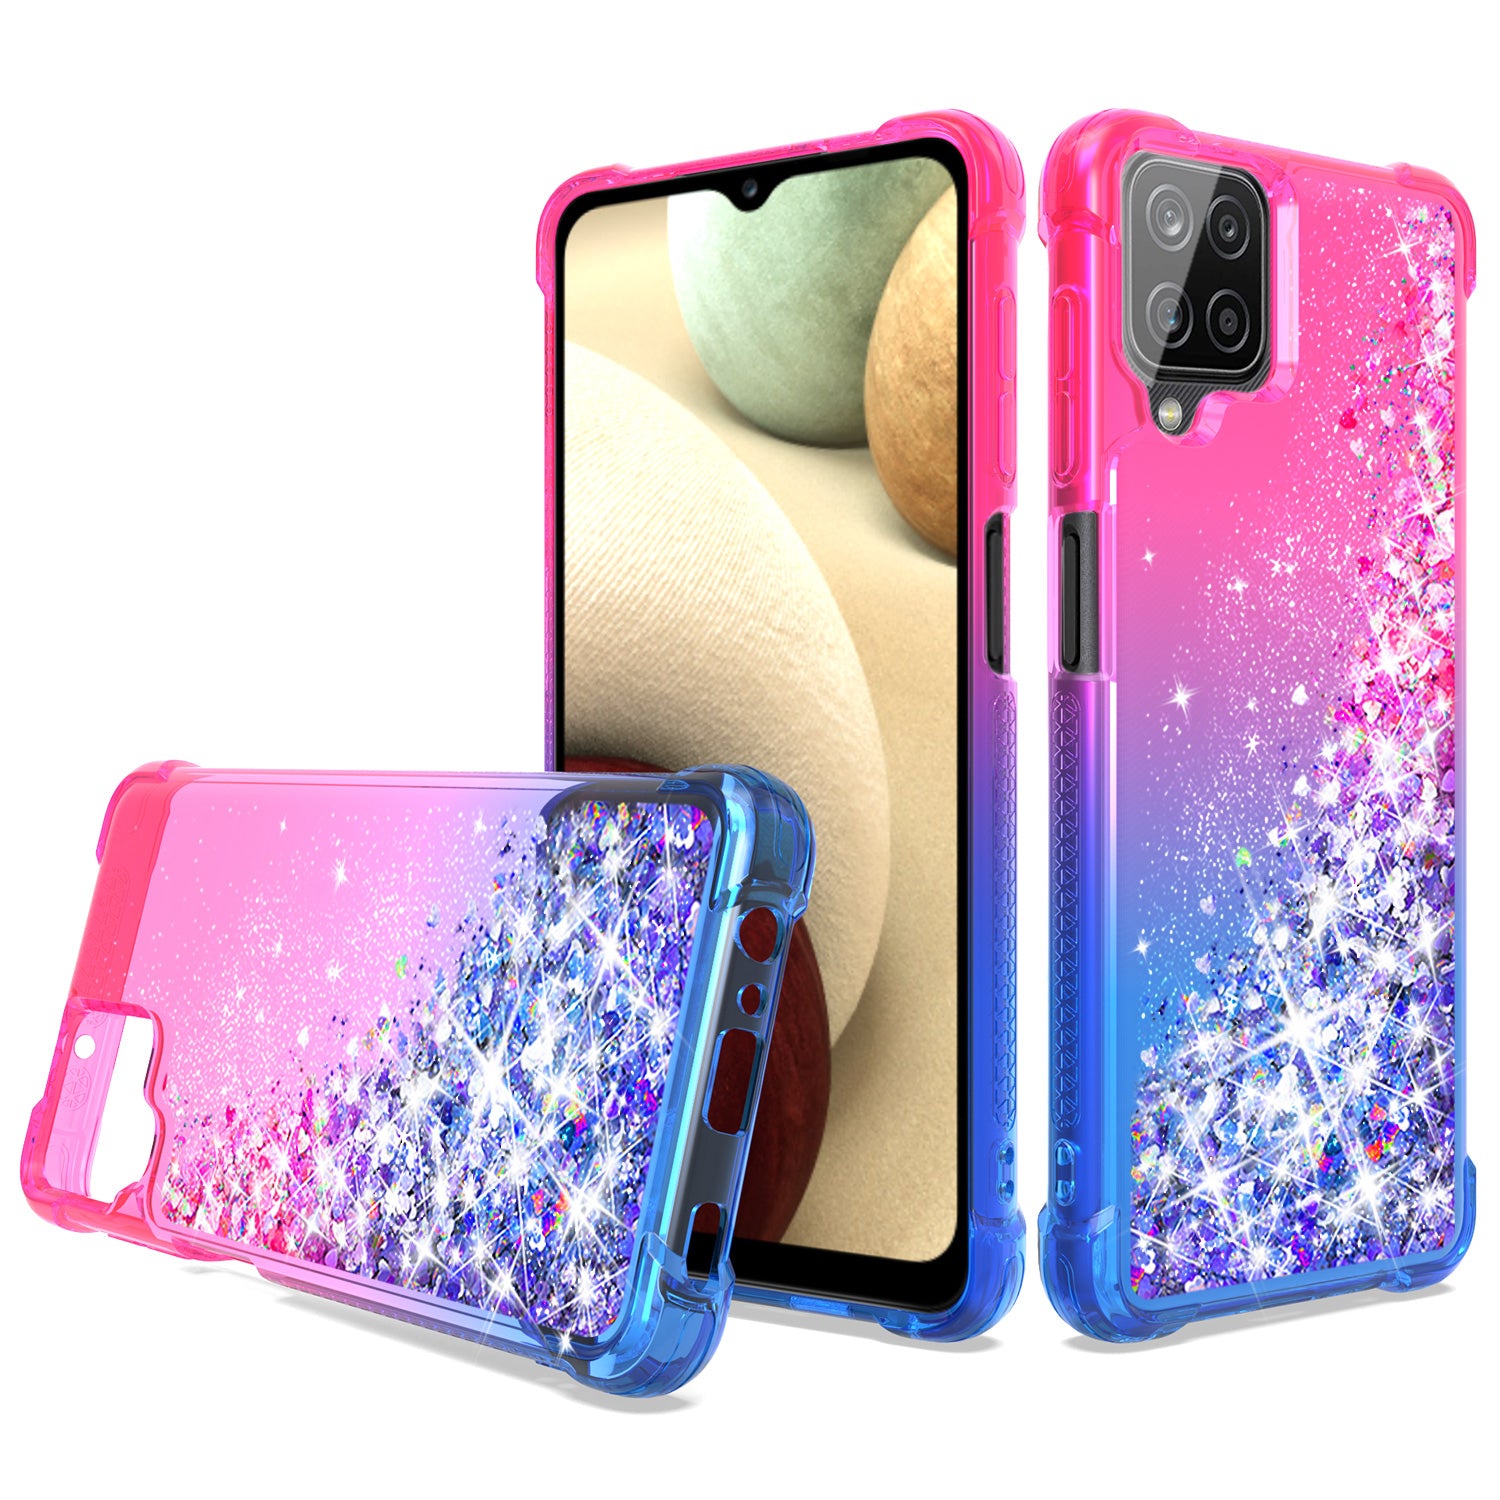 Shiny Flowing Glitter Liquid Bumper Case For Galaxy A12 5G In Pink